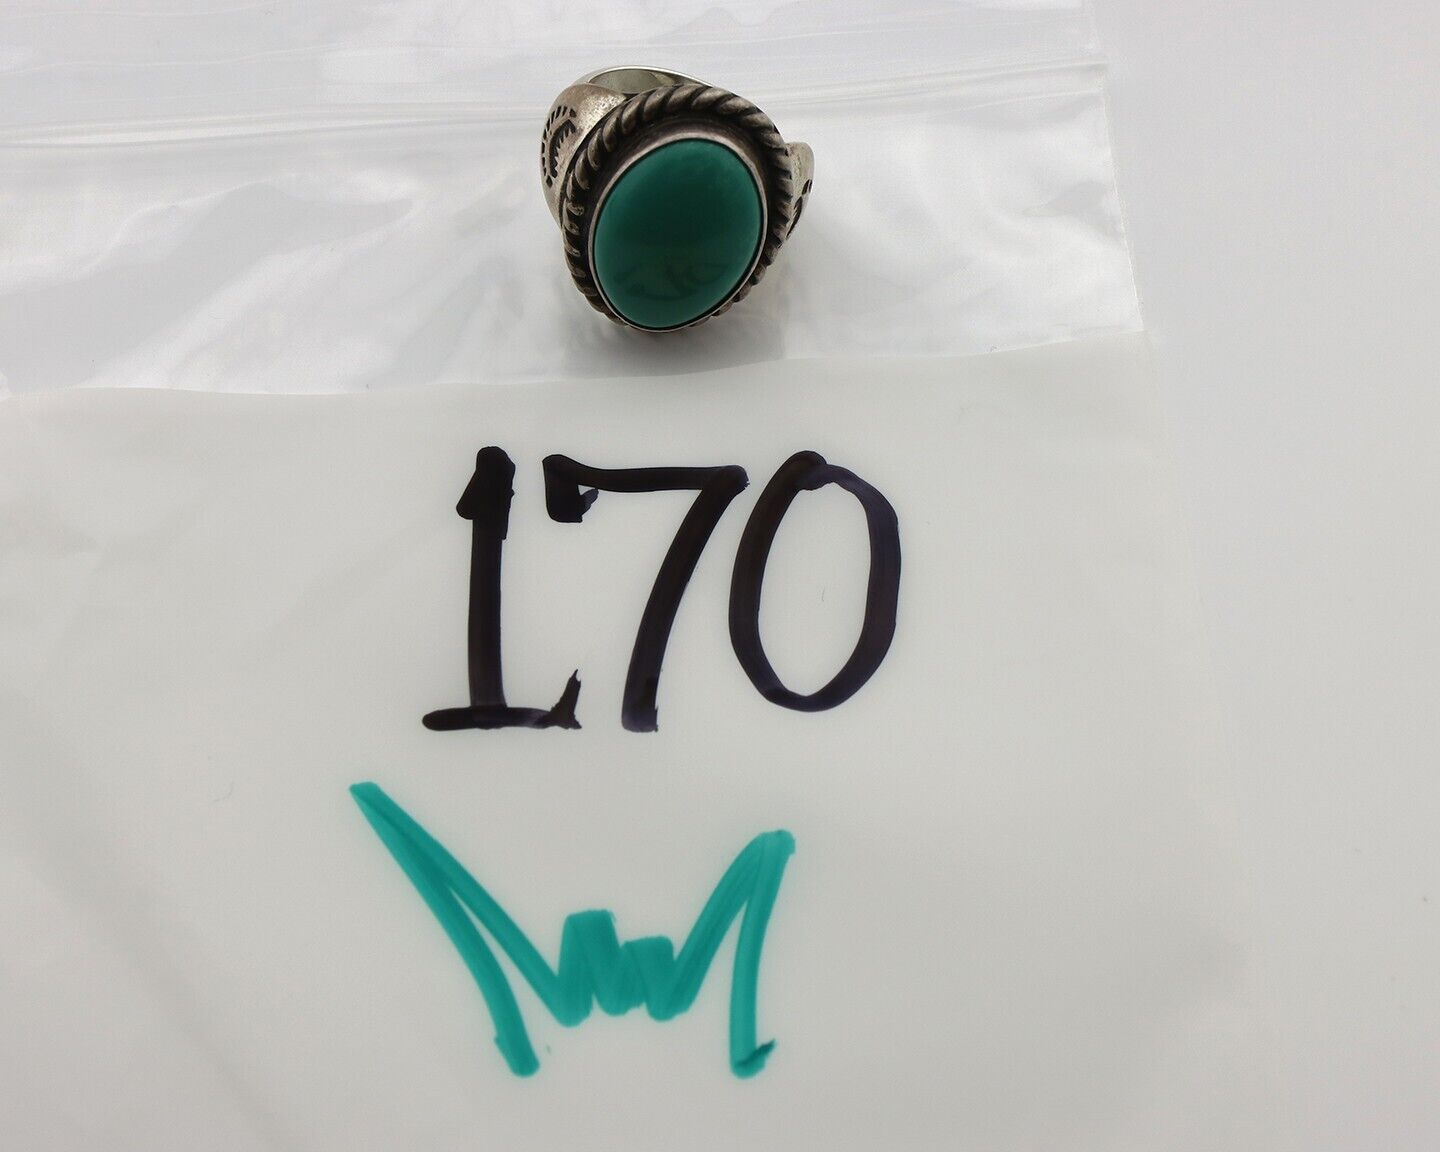 Navajo Handmade Ring 925 Silver Blue Turquoise Signed Native Artist C.80's